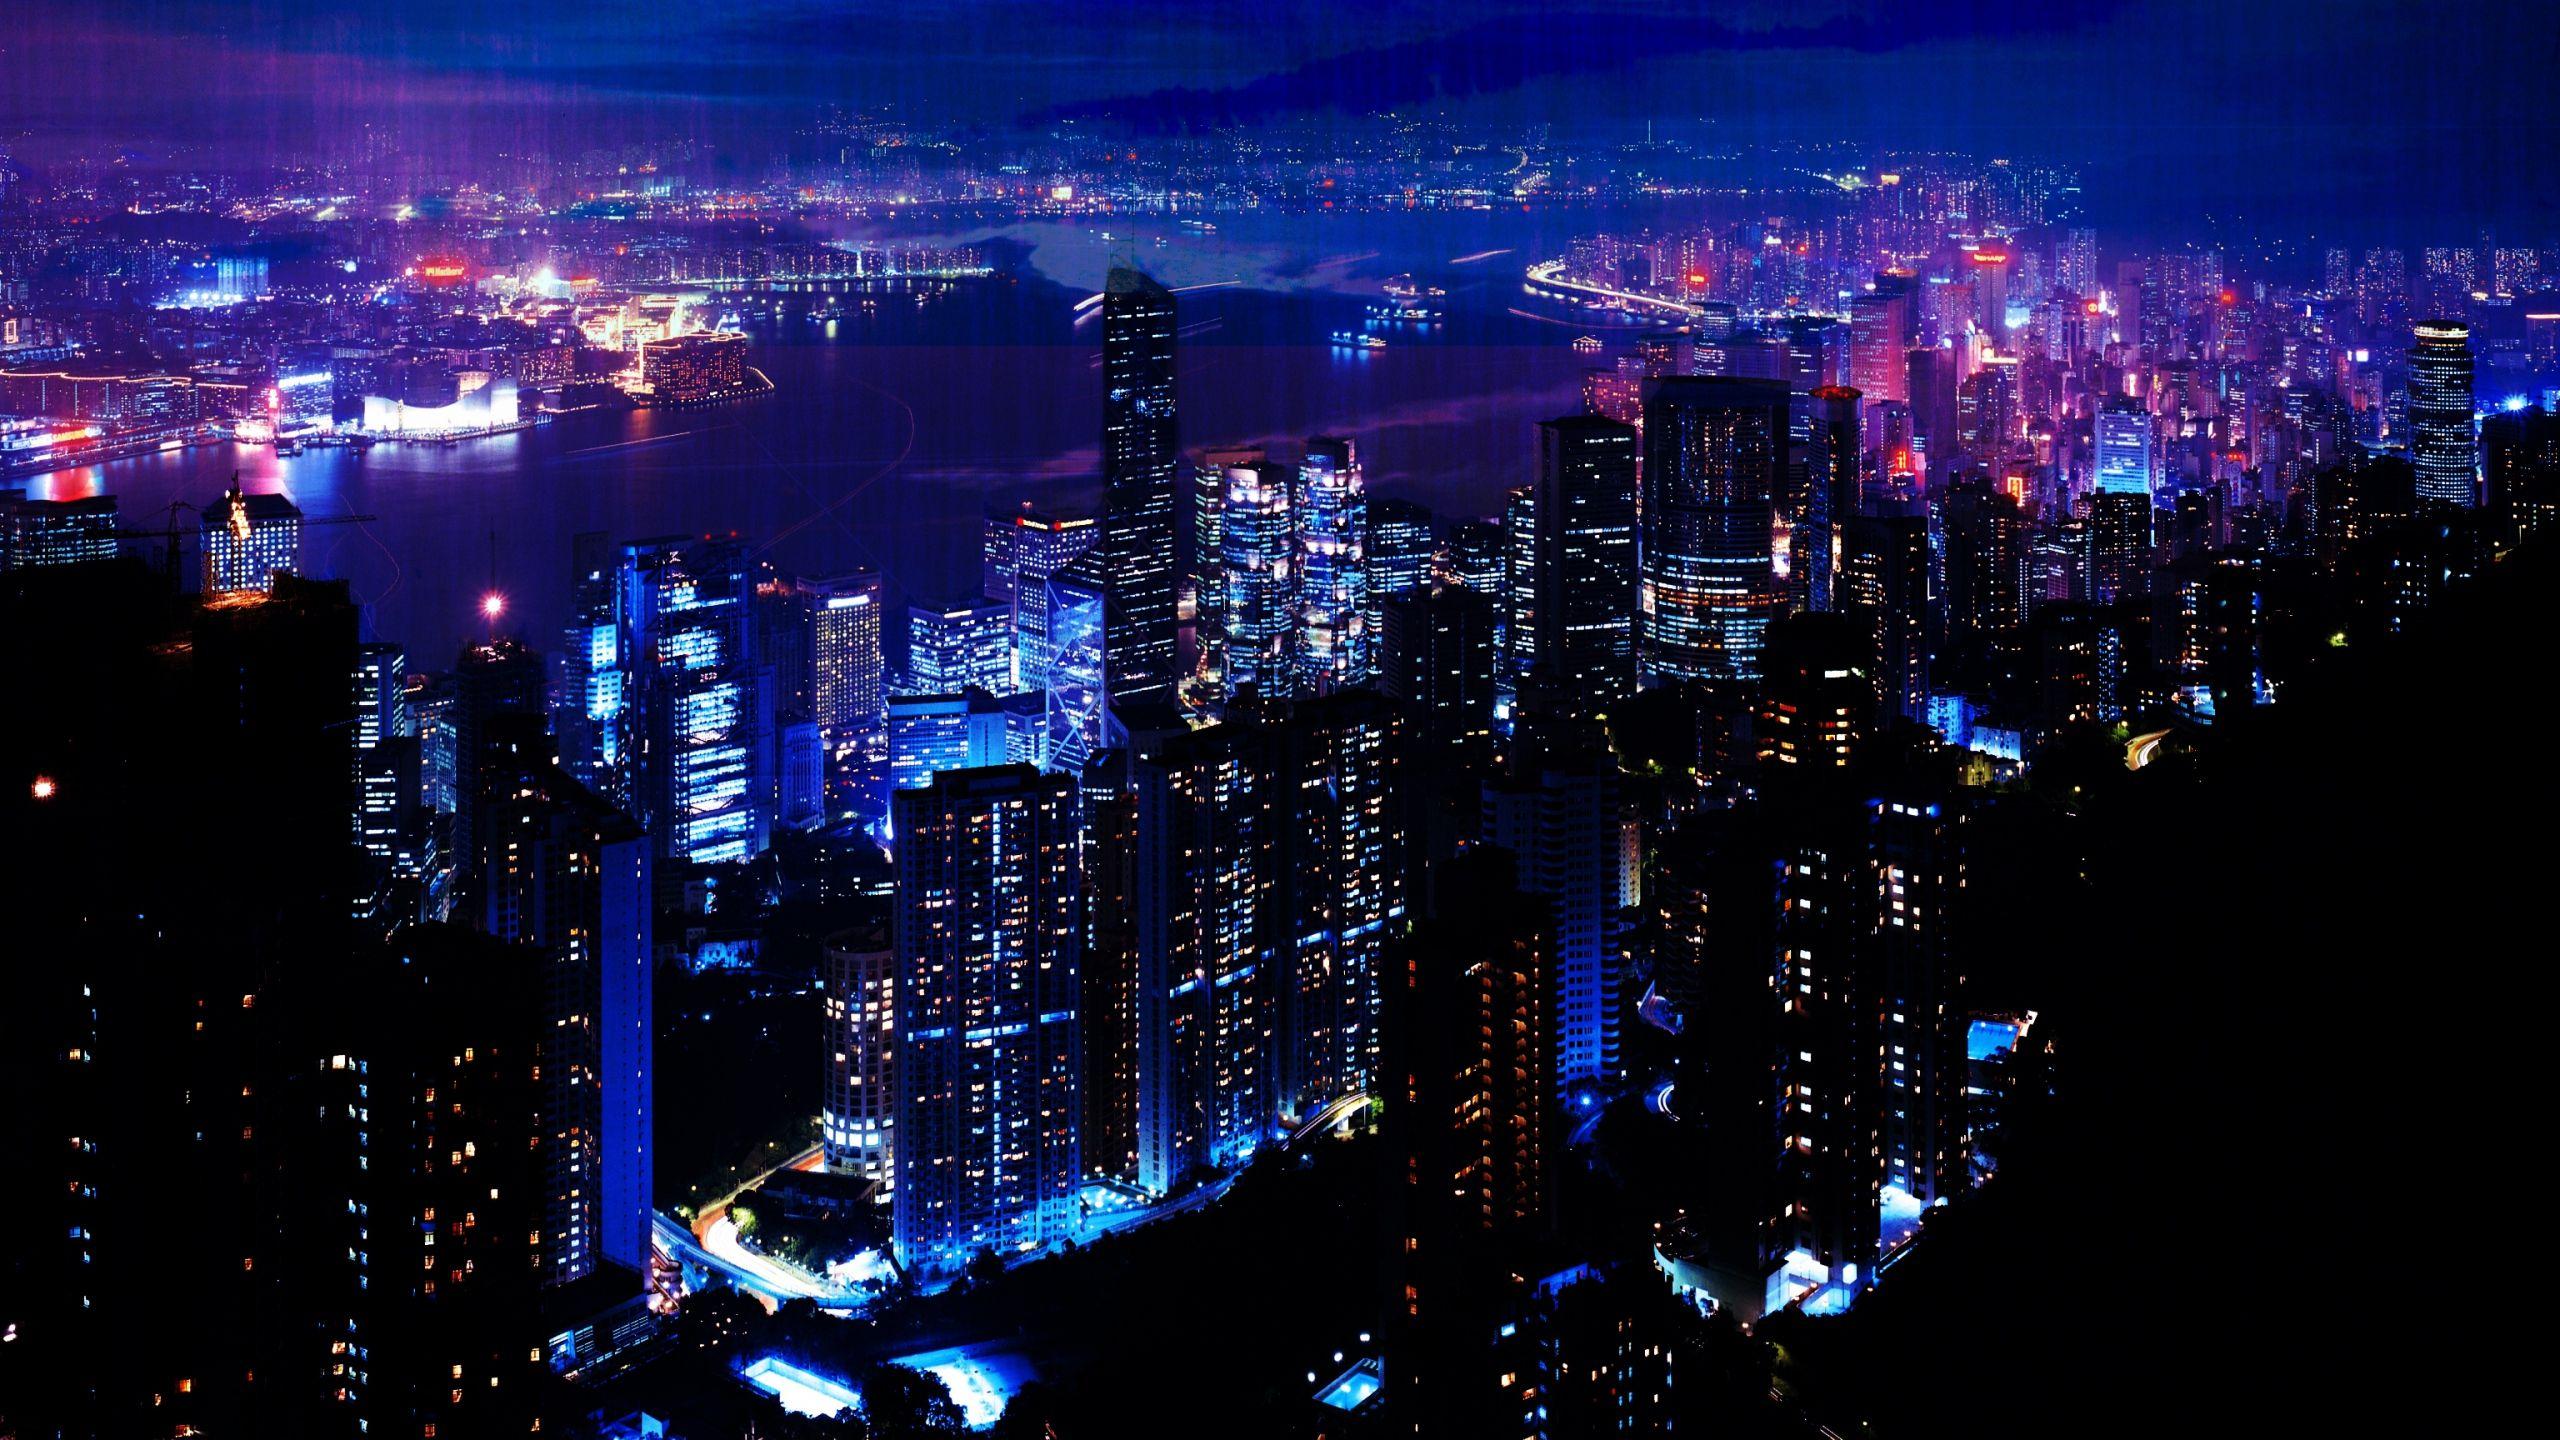 Night City Wallpaper High Quality Free Download. City wallpaper